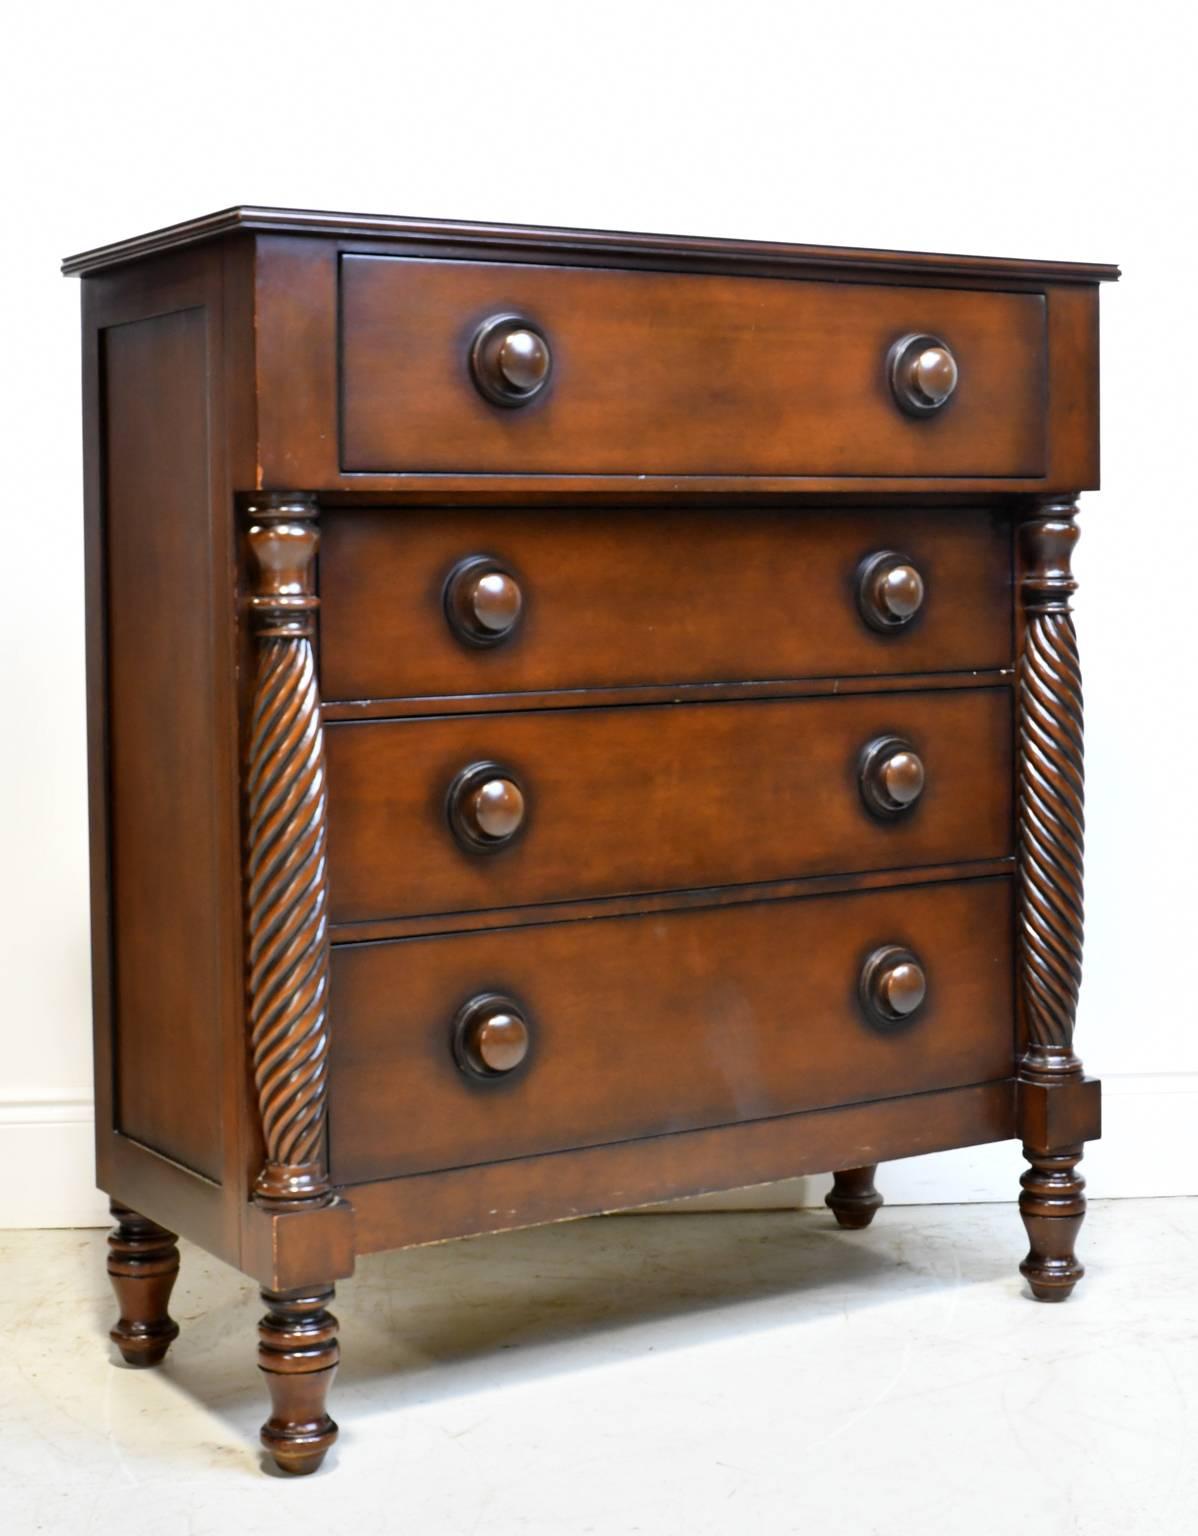 A Ralph Lauren chest in the British Colonial-style in mahogany with four spacious storage drawers that feature inset round wooden pulls. Chest rests on turned feet and features two turned columns with spiral fluting that flank three of the drawers.